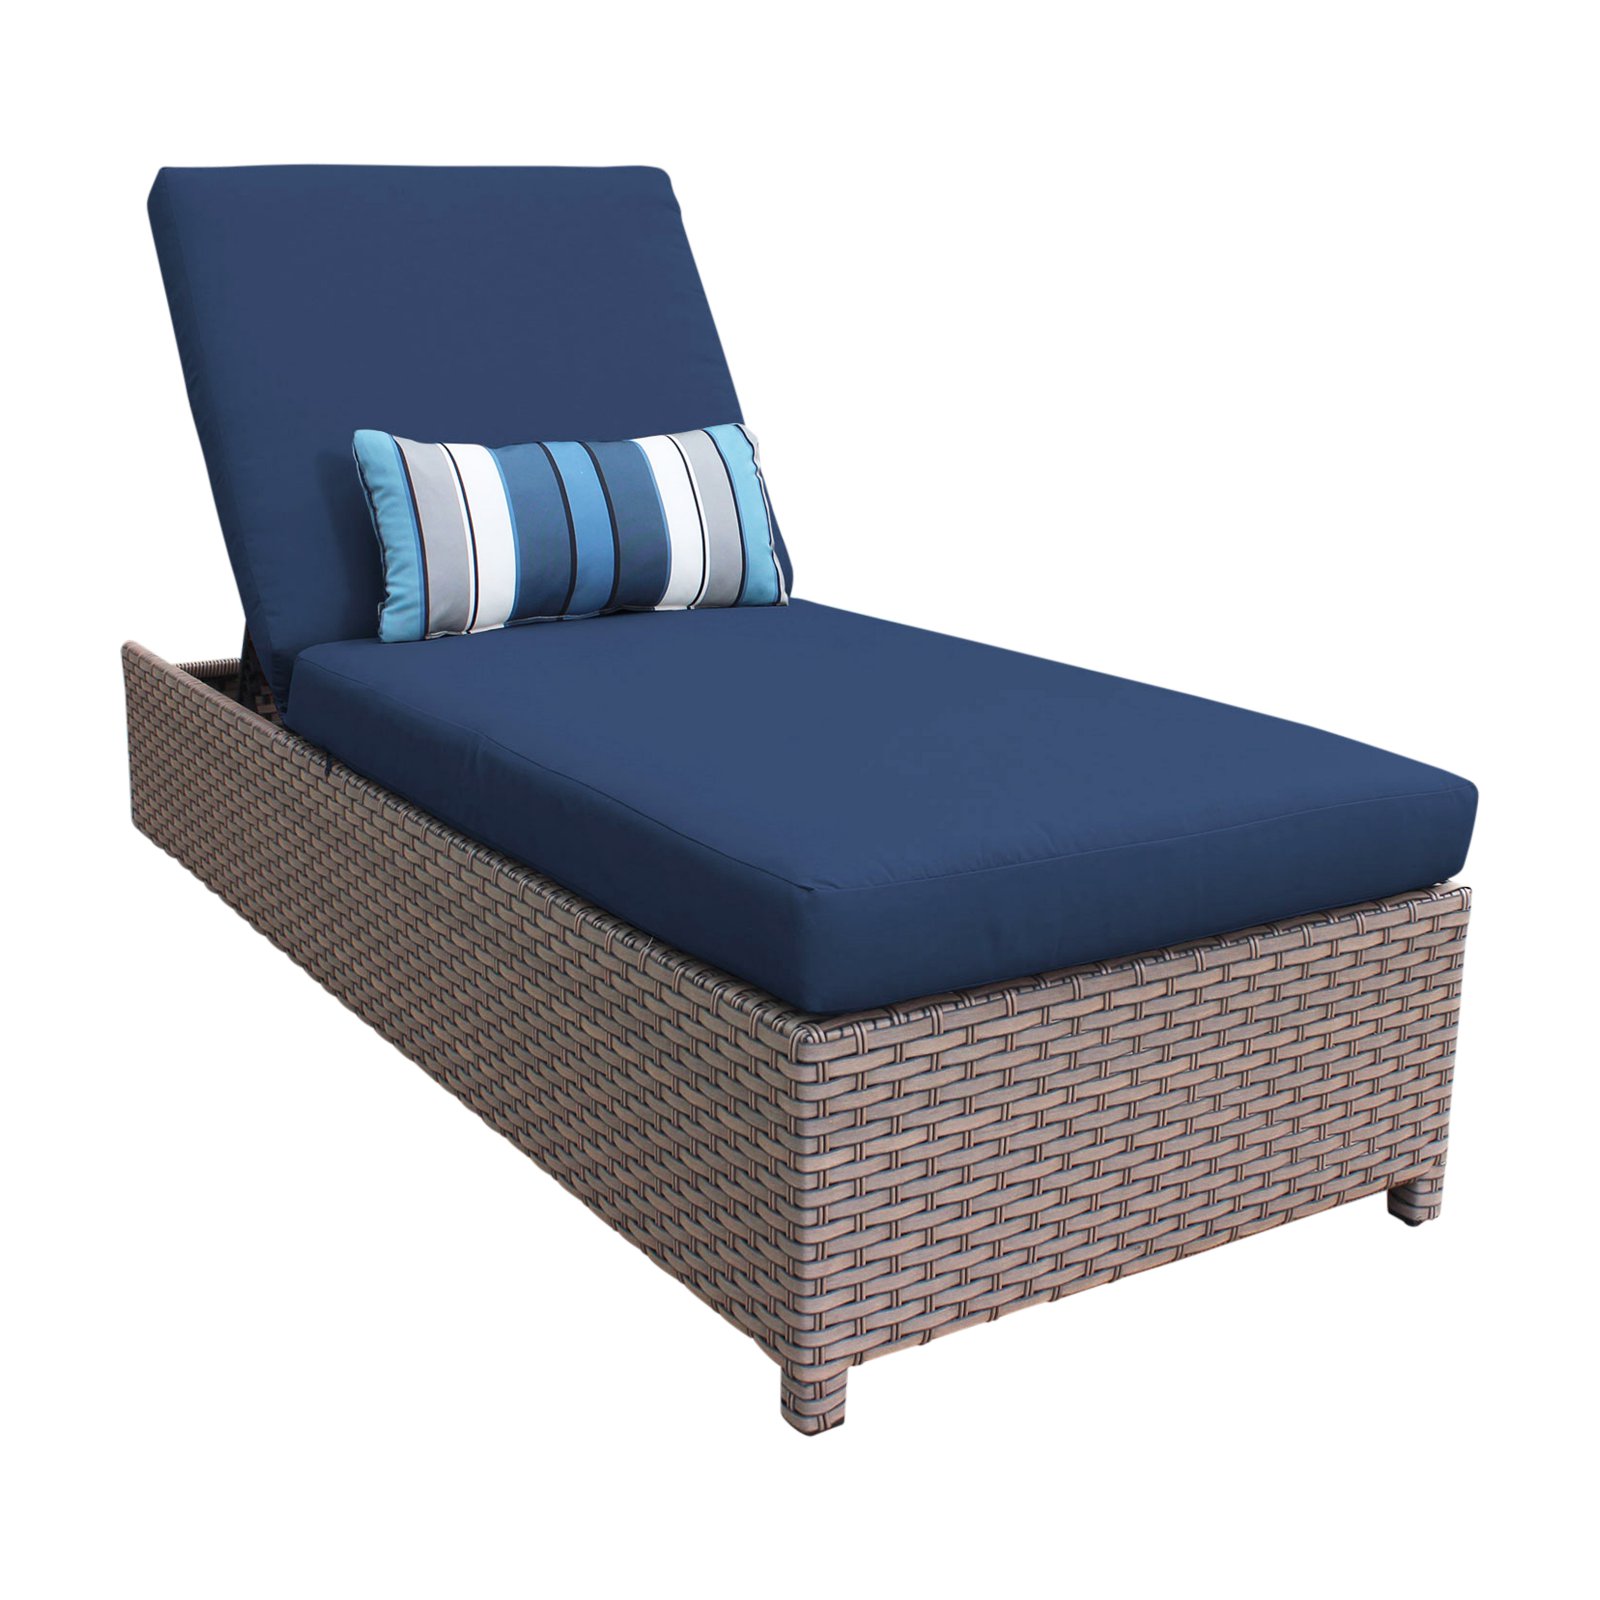 TK Classics Florence Wheeled Wicker Outdoor Chaise Lounge Chair - image 1 of 11